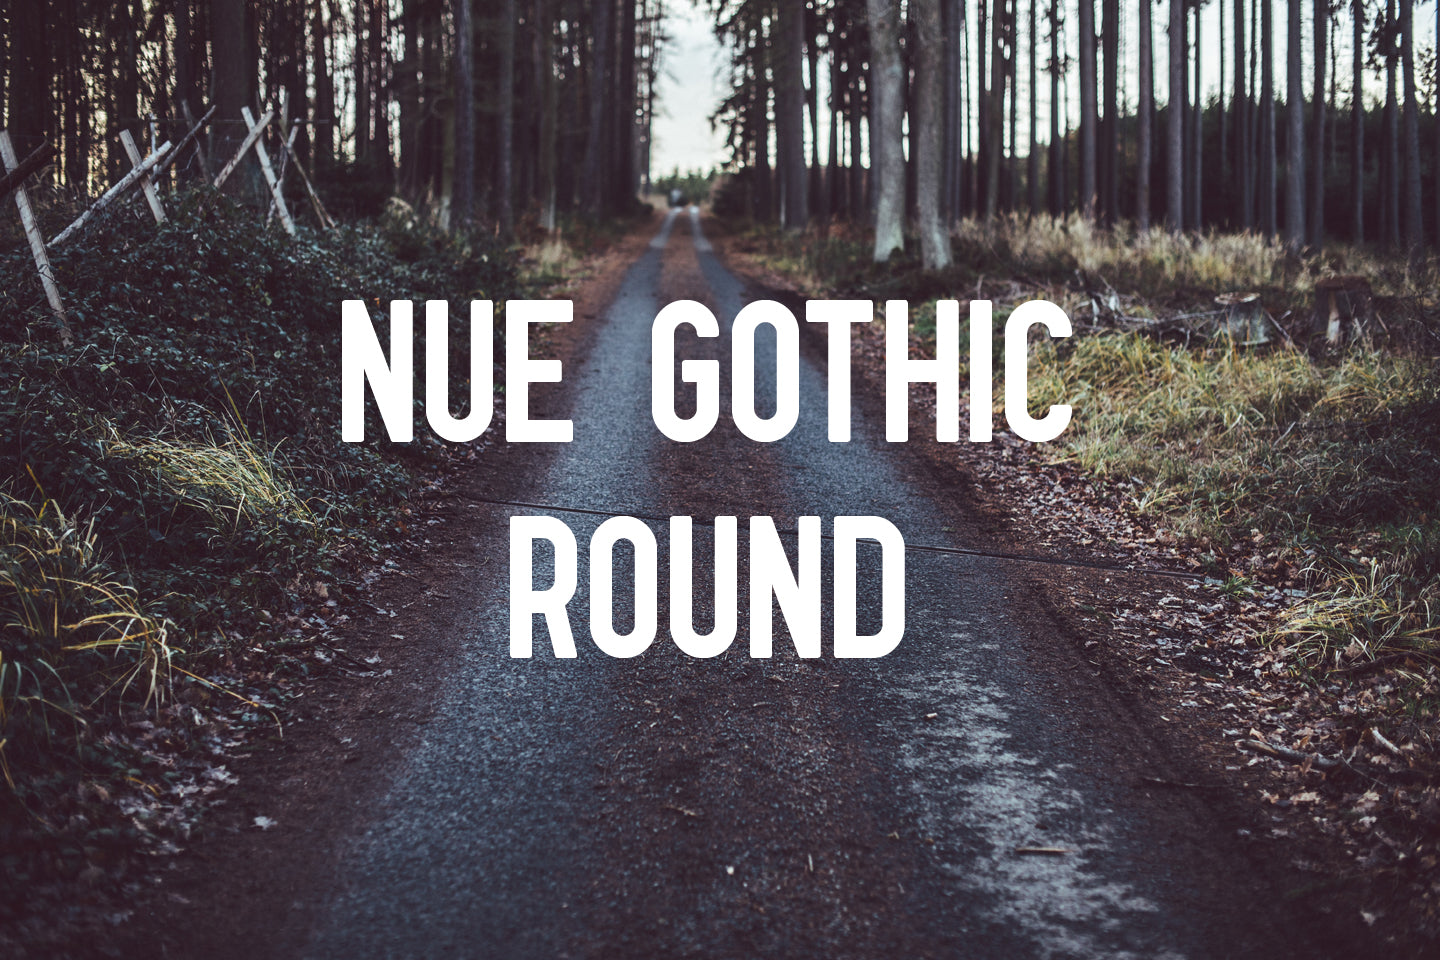 Nue Gothic Grotesque Gothic font by Out of Step Font Company